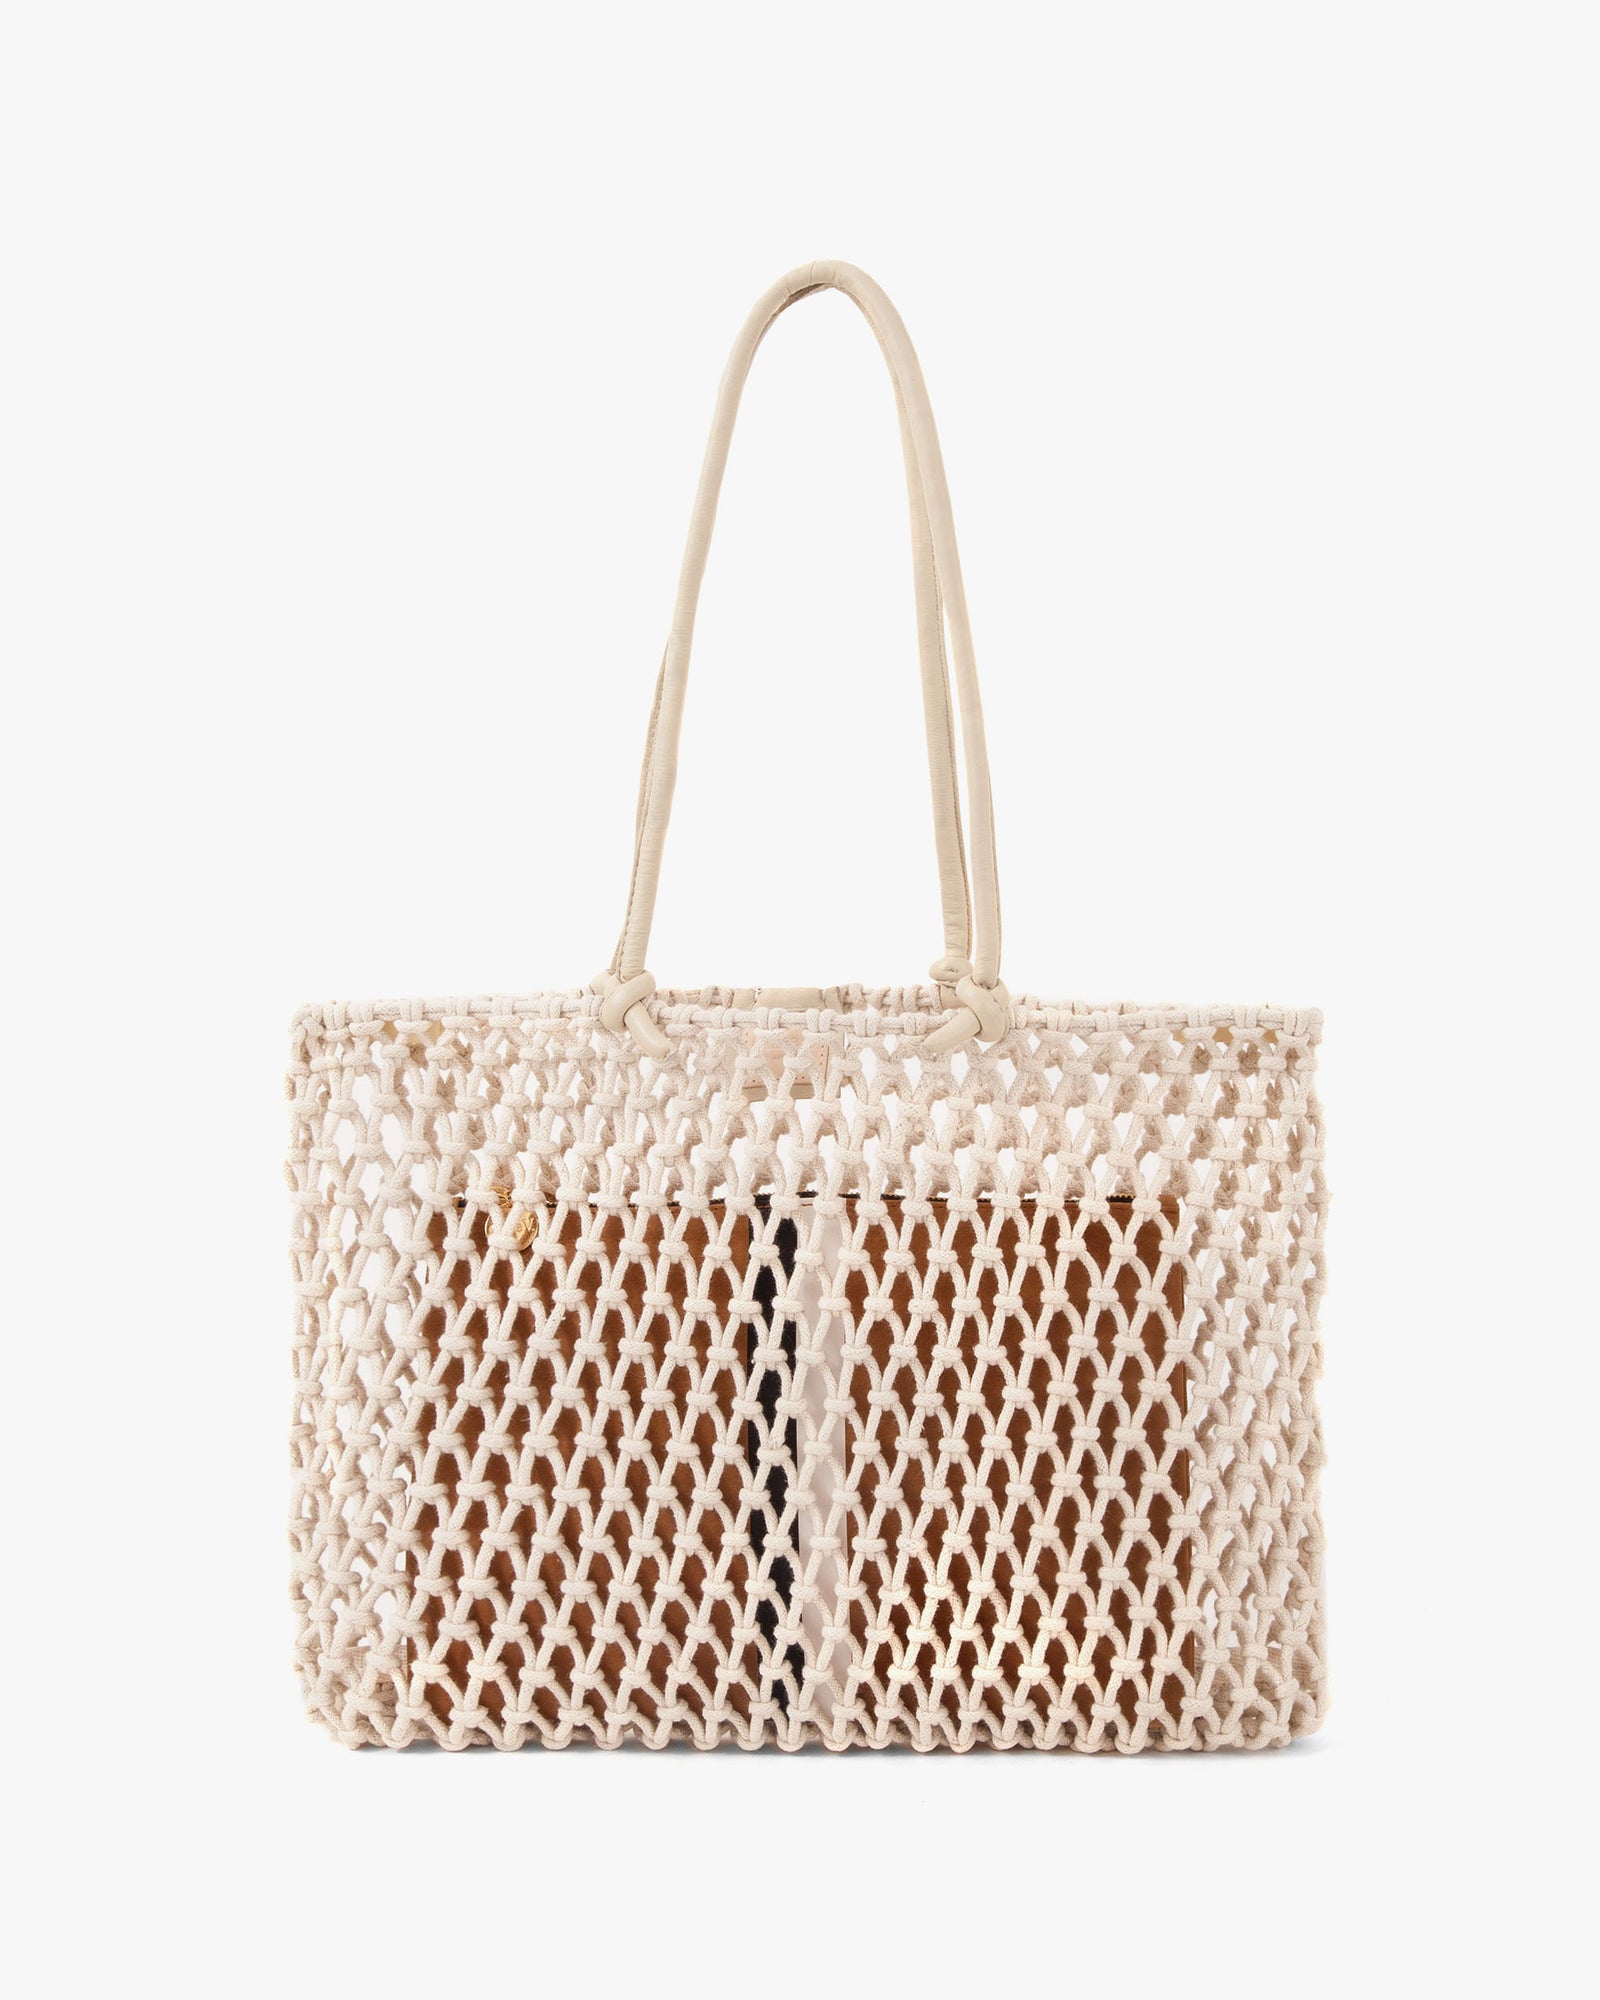 Clare V, Bags, Nwt Clare V Summer Simple Tote Bag Crochet Checkers Clare  Vivier